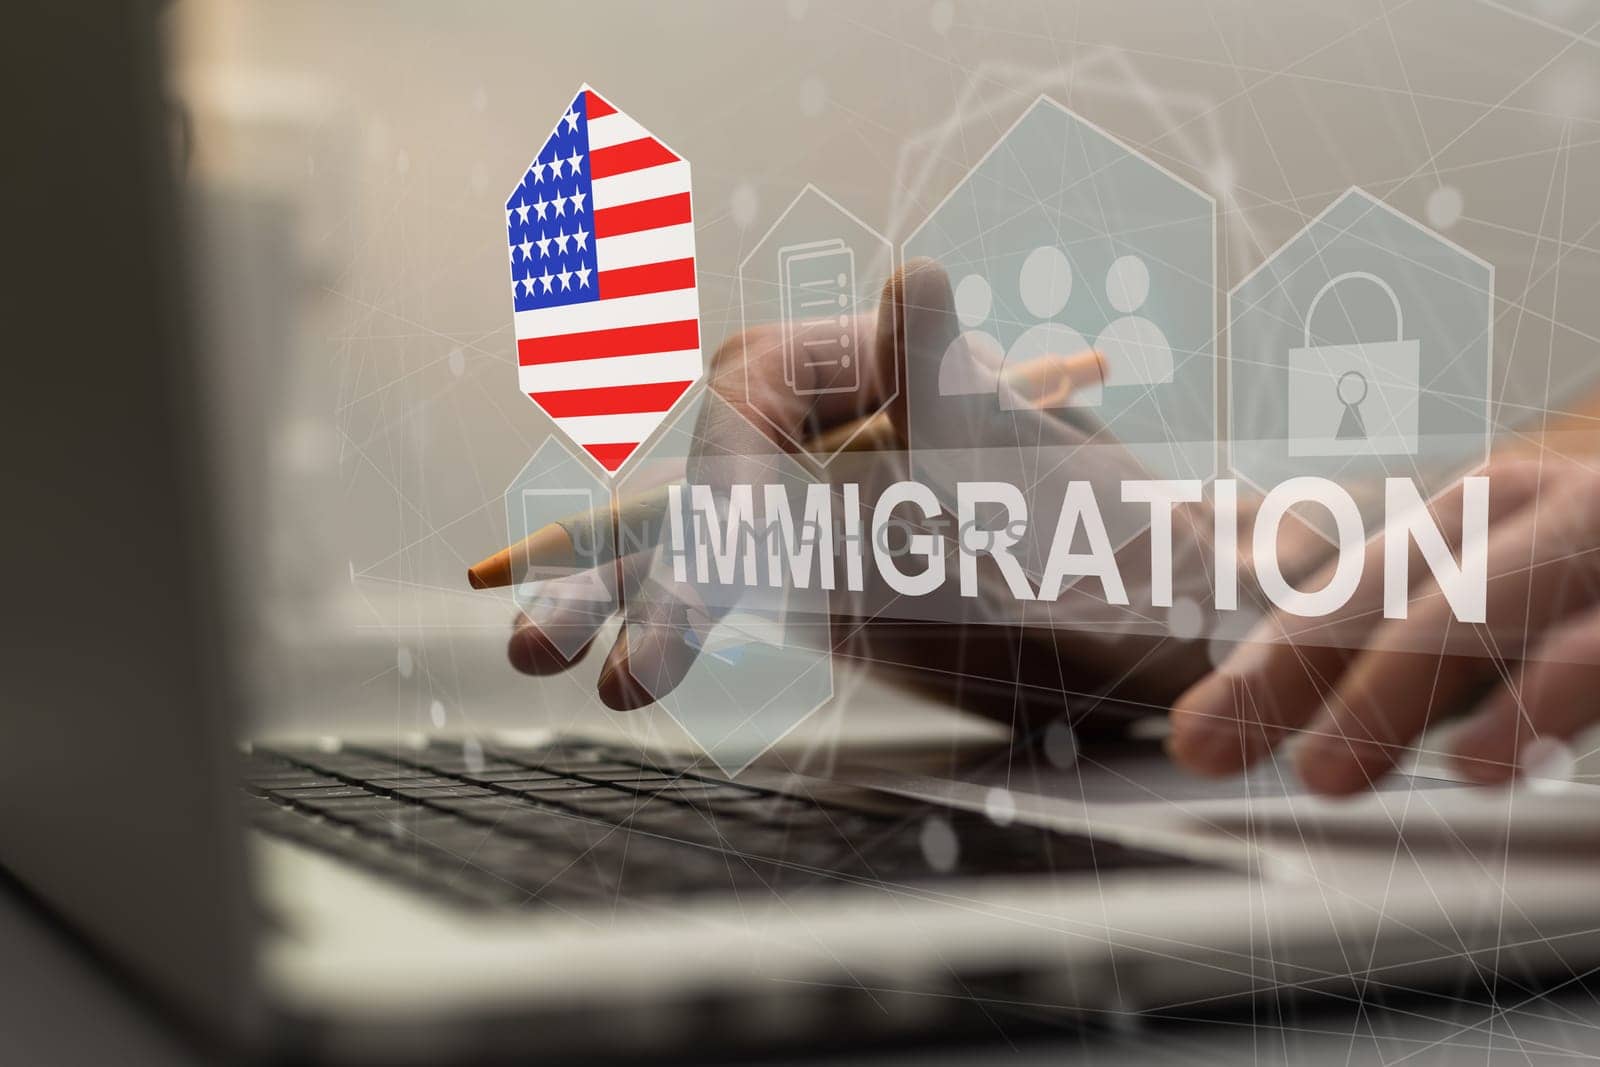 United States of America immigration concept. Man pressing virtual button with flag icon